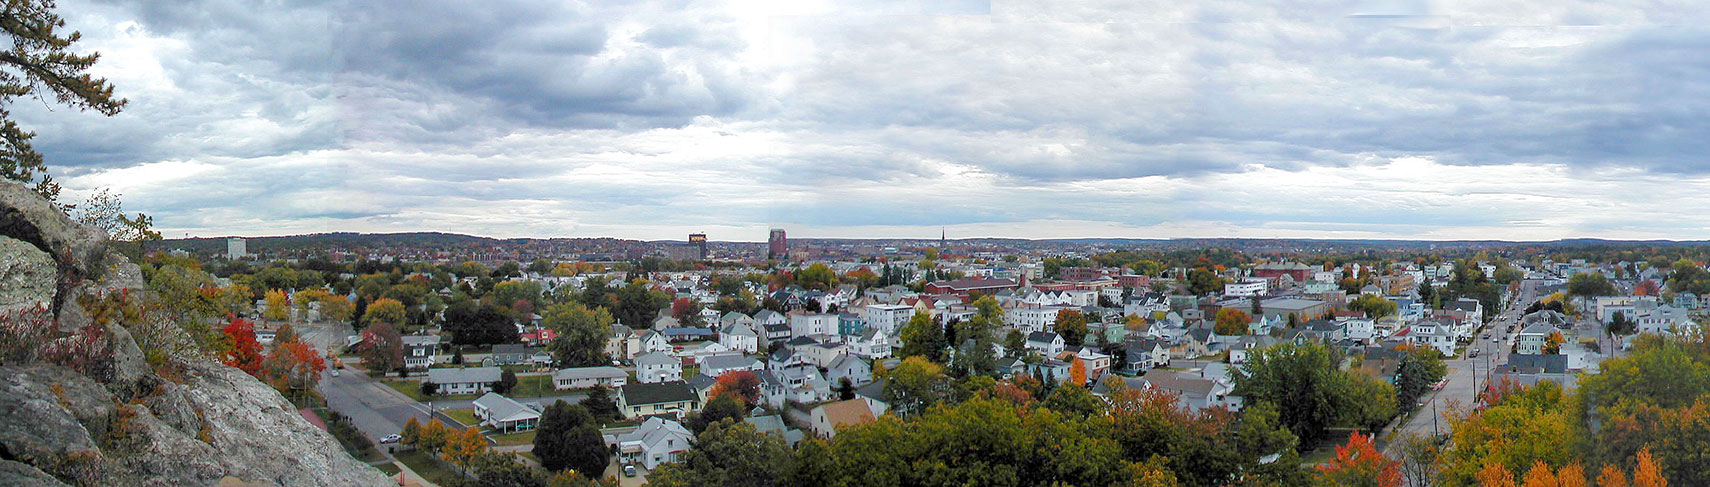 View of Manchester, New Hampshire